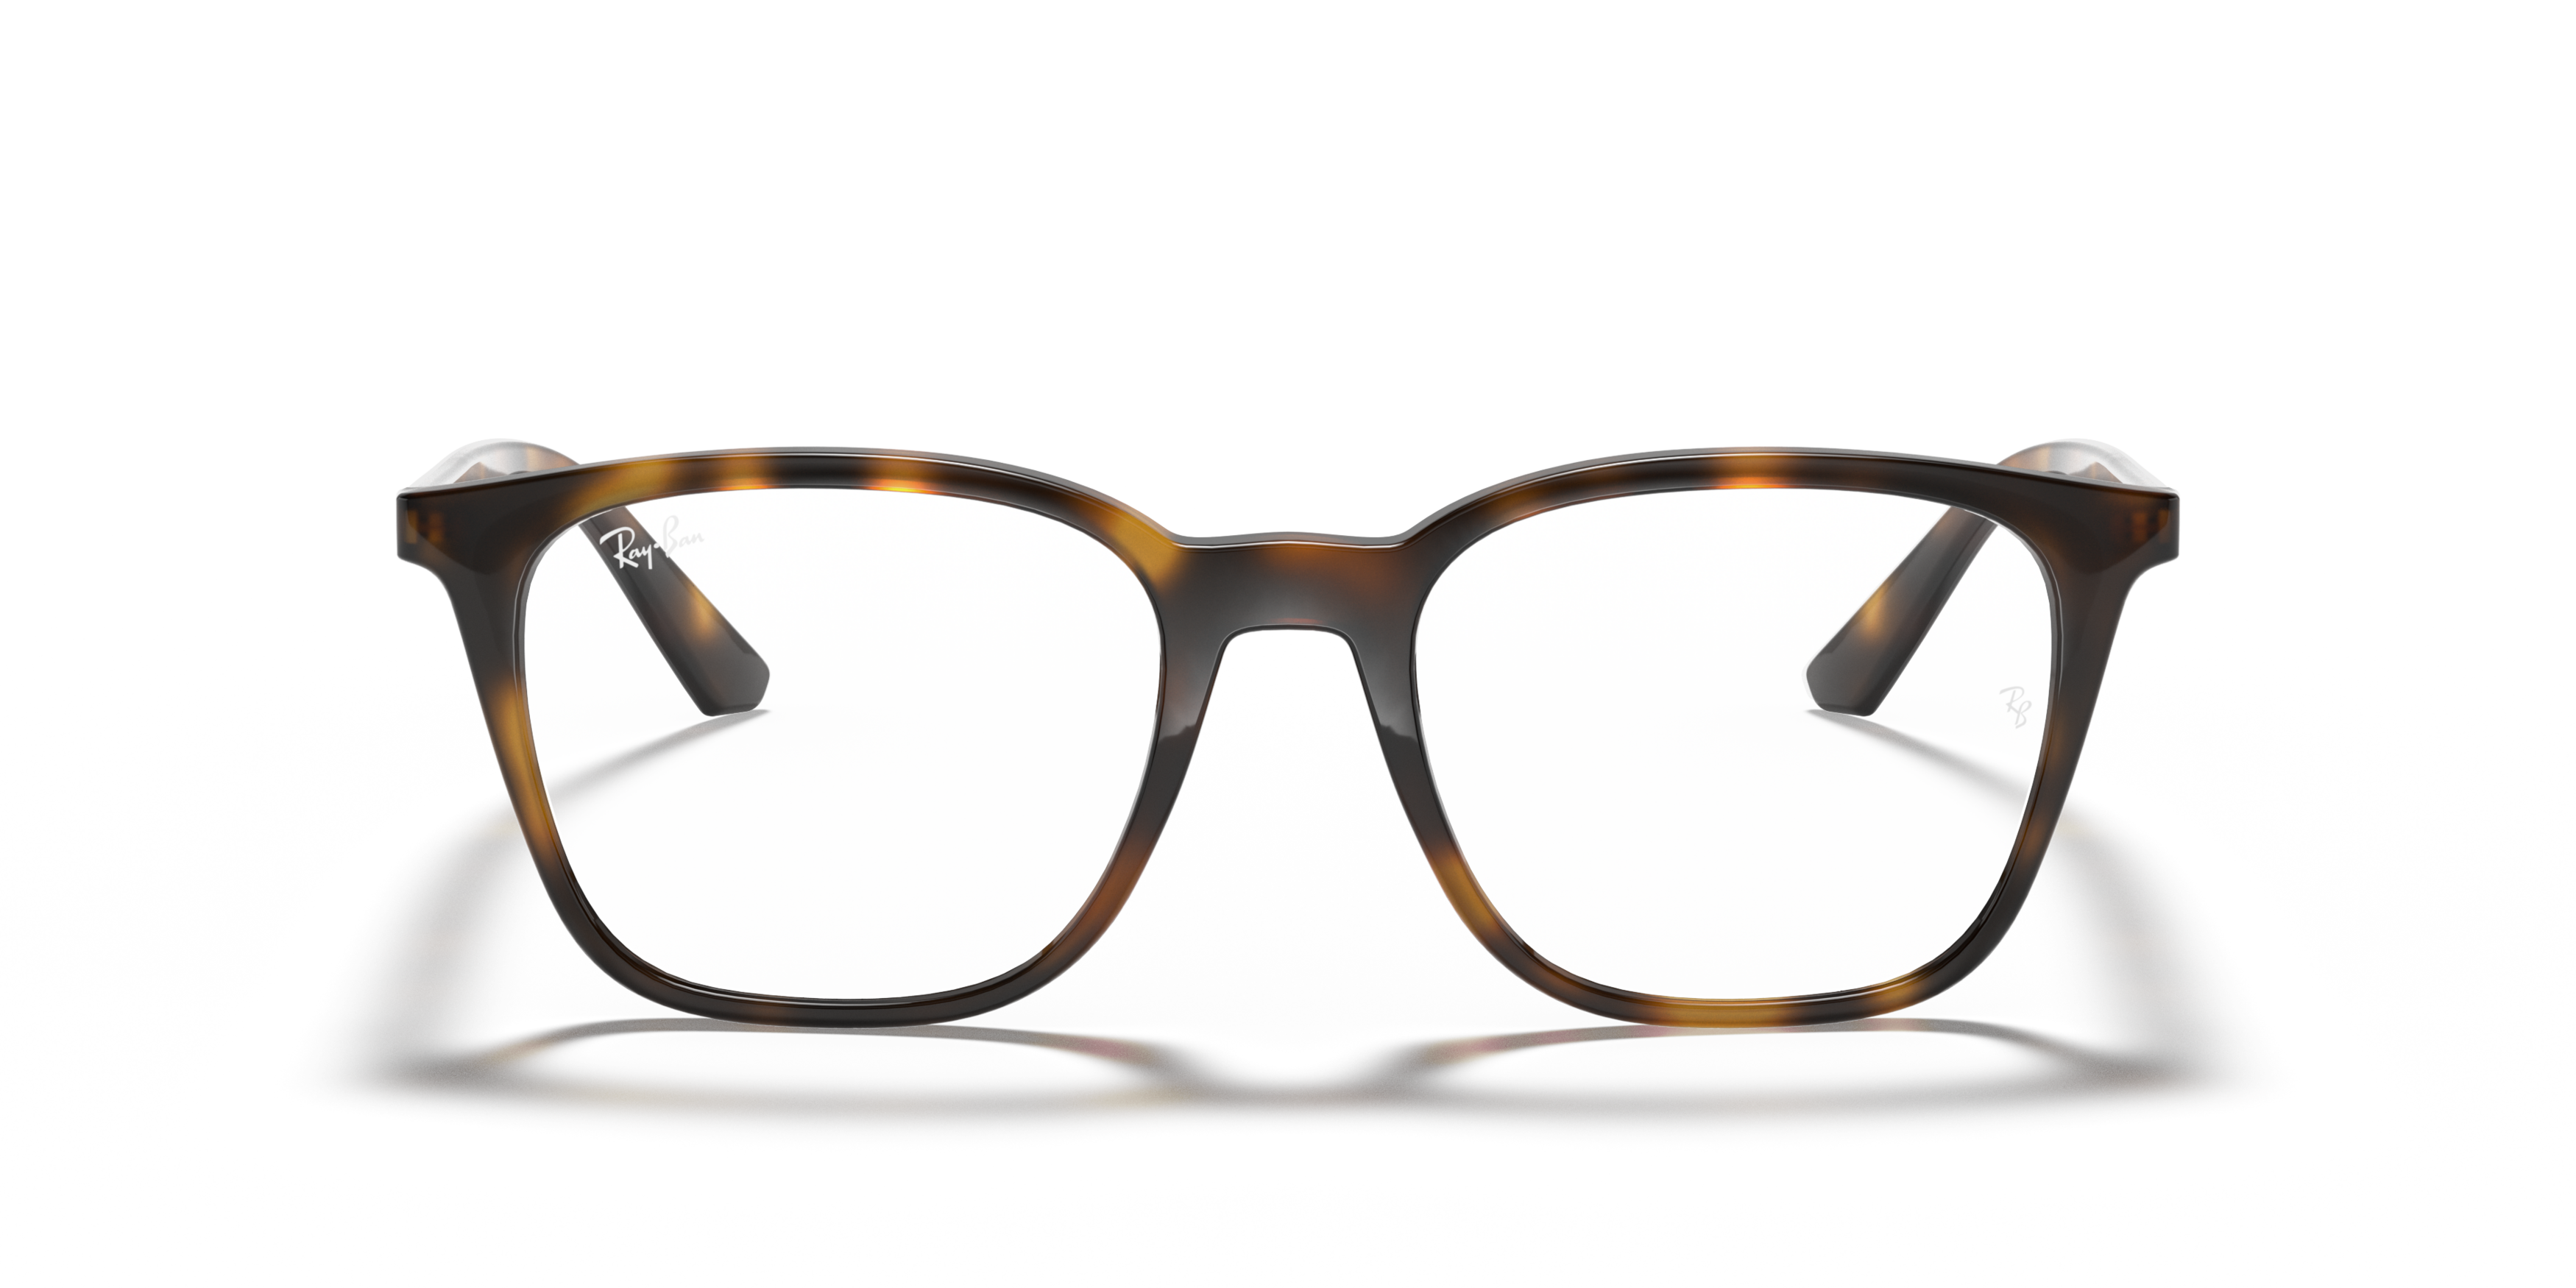 Front Ray-Ban RX 7177 Glasses Transparent / Tortoise Shell